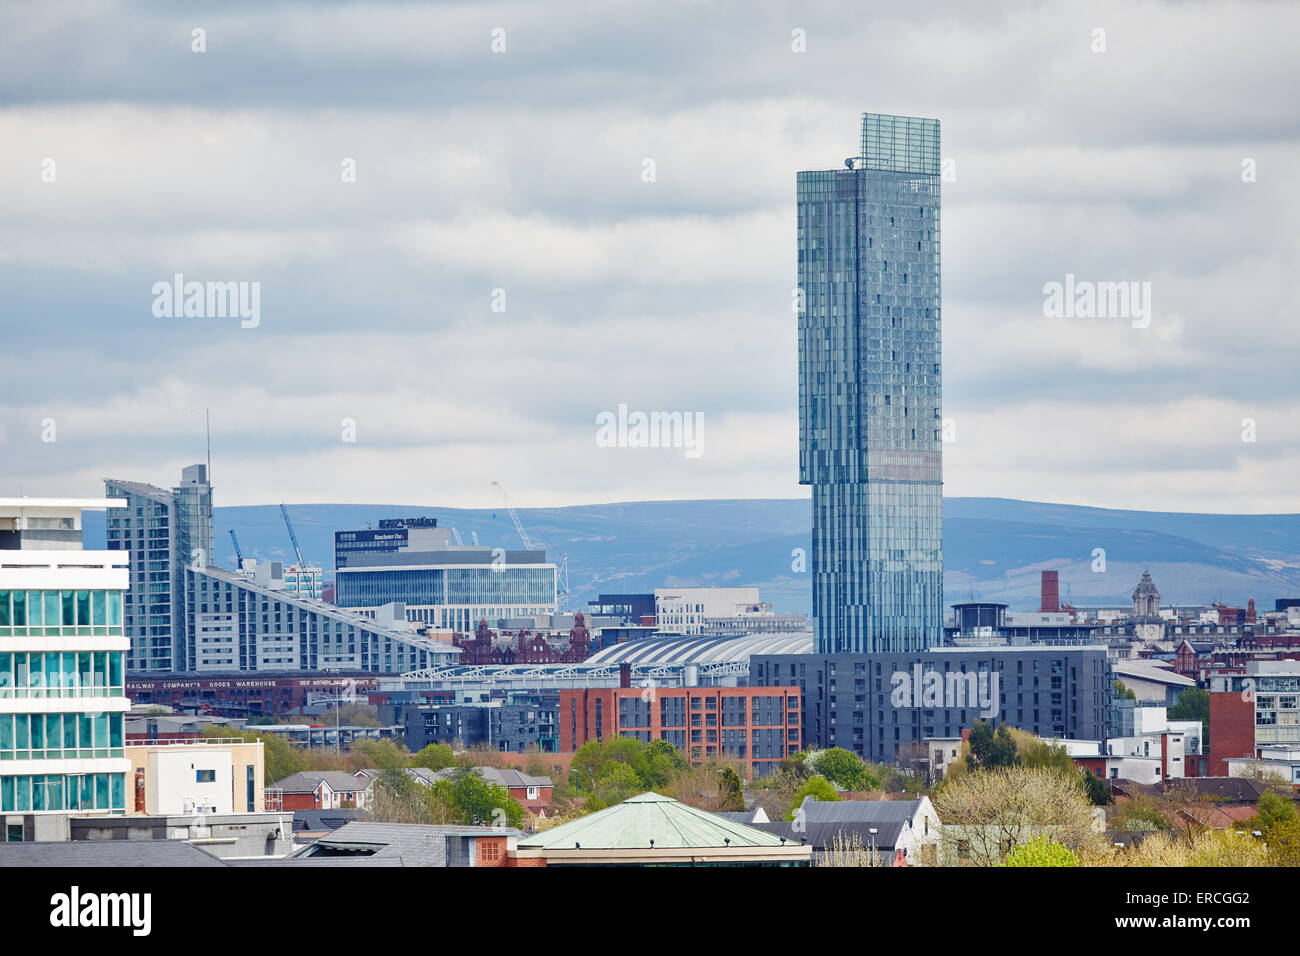 Beetham Tower from Salford Quays on the Manchester skyline      UK Great Britain British United Kingdom Europe European island E Stock Photo